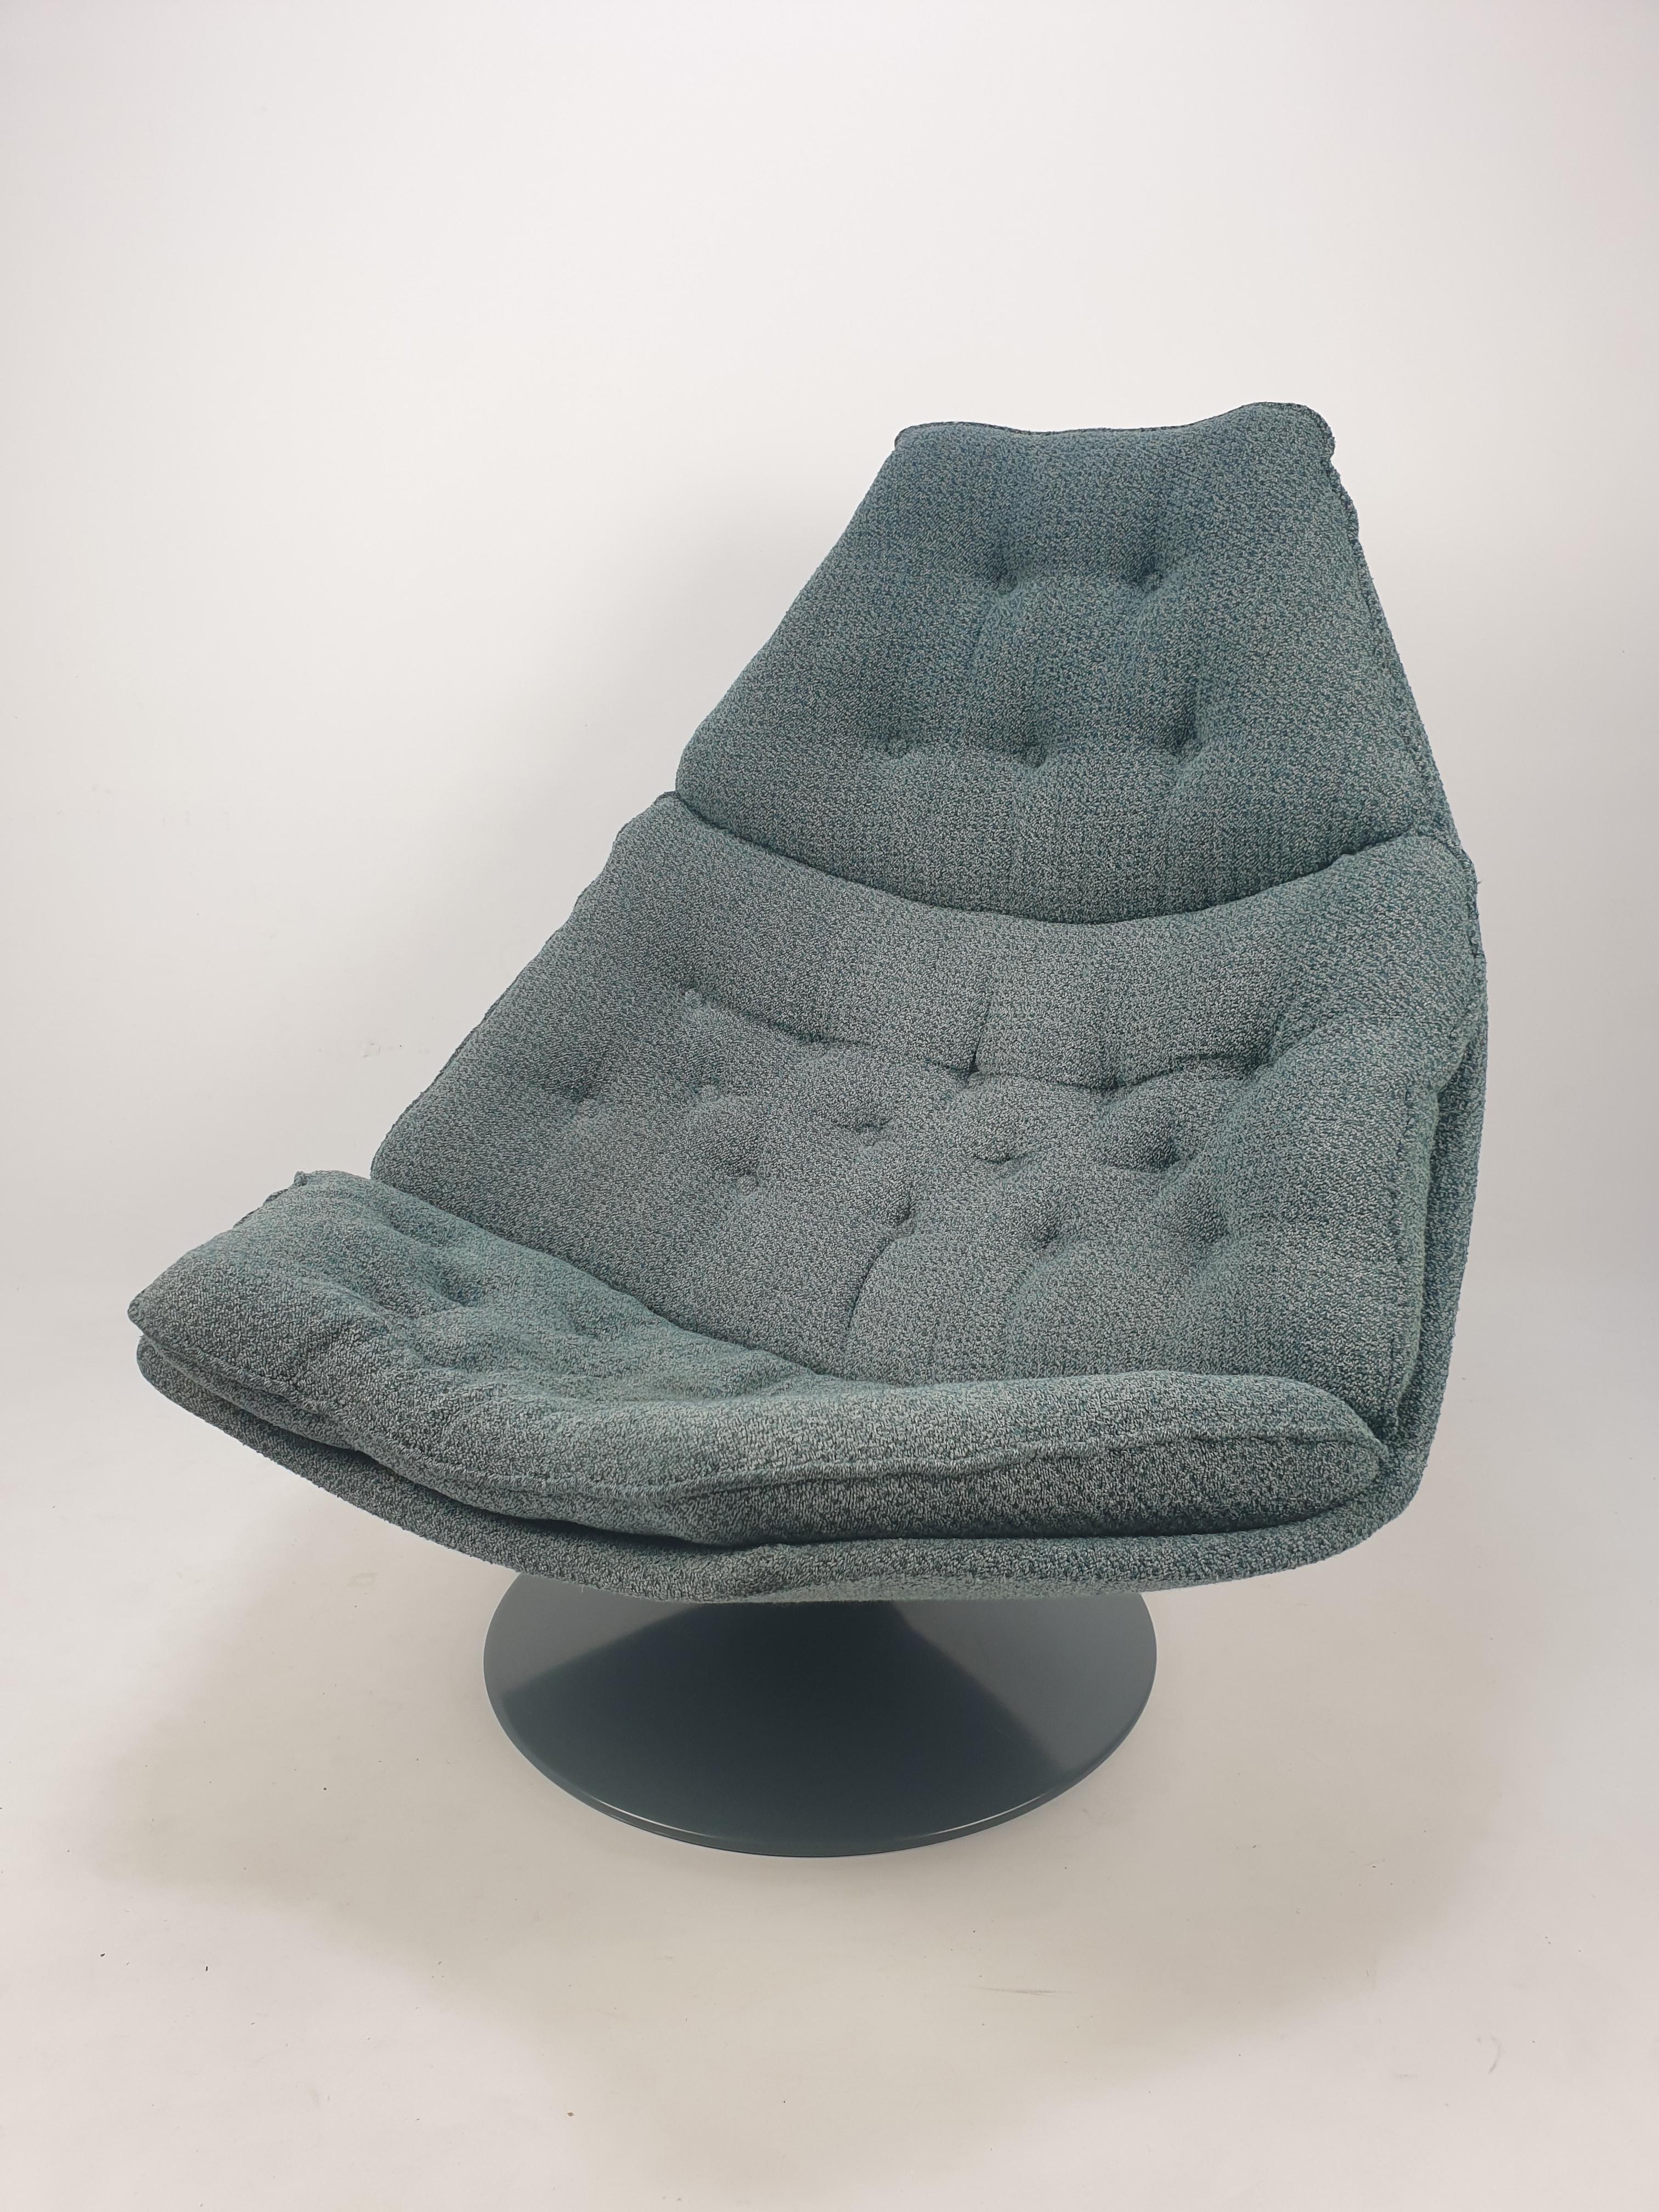 Very comfortable Artifort lounge chair, model F588. 
Designed by the famous English designer Geoffrey Harcourt in the 60's. 

It is reupholstered with wool fabric. 

This particular chair is fabricated in 1968 and it has a metal foot.